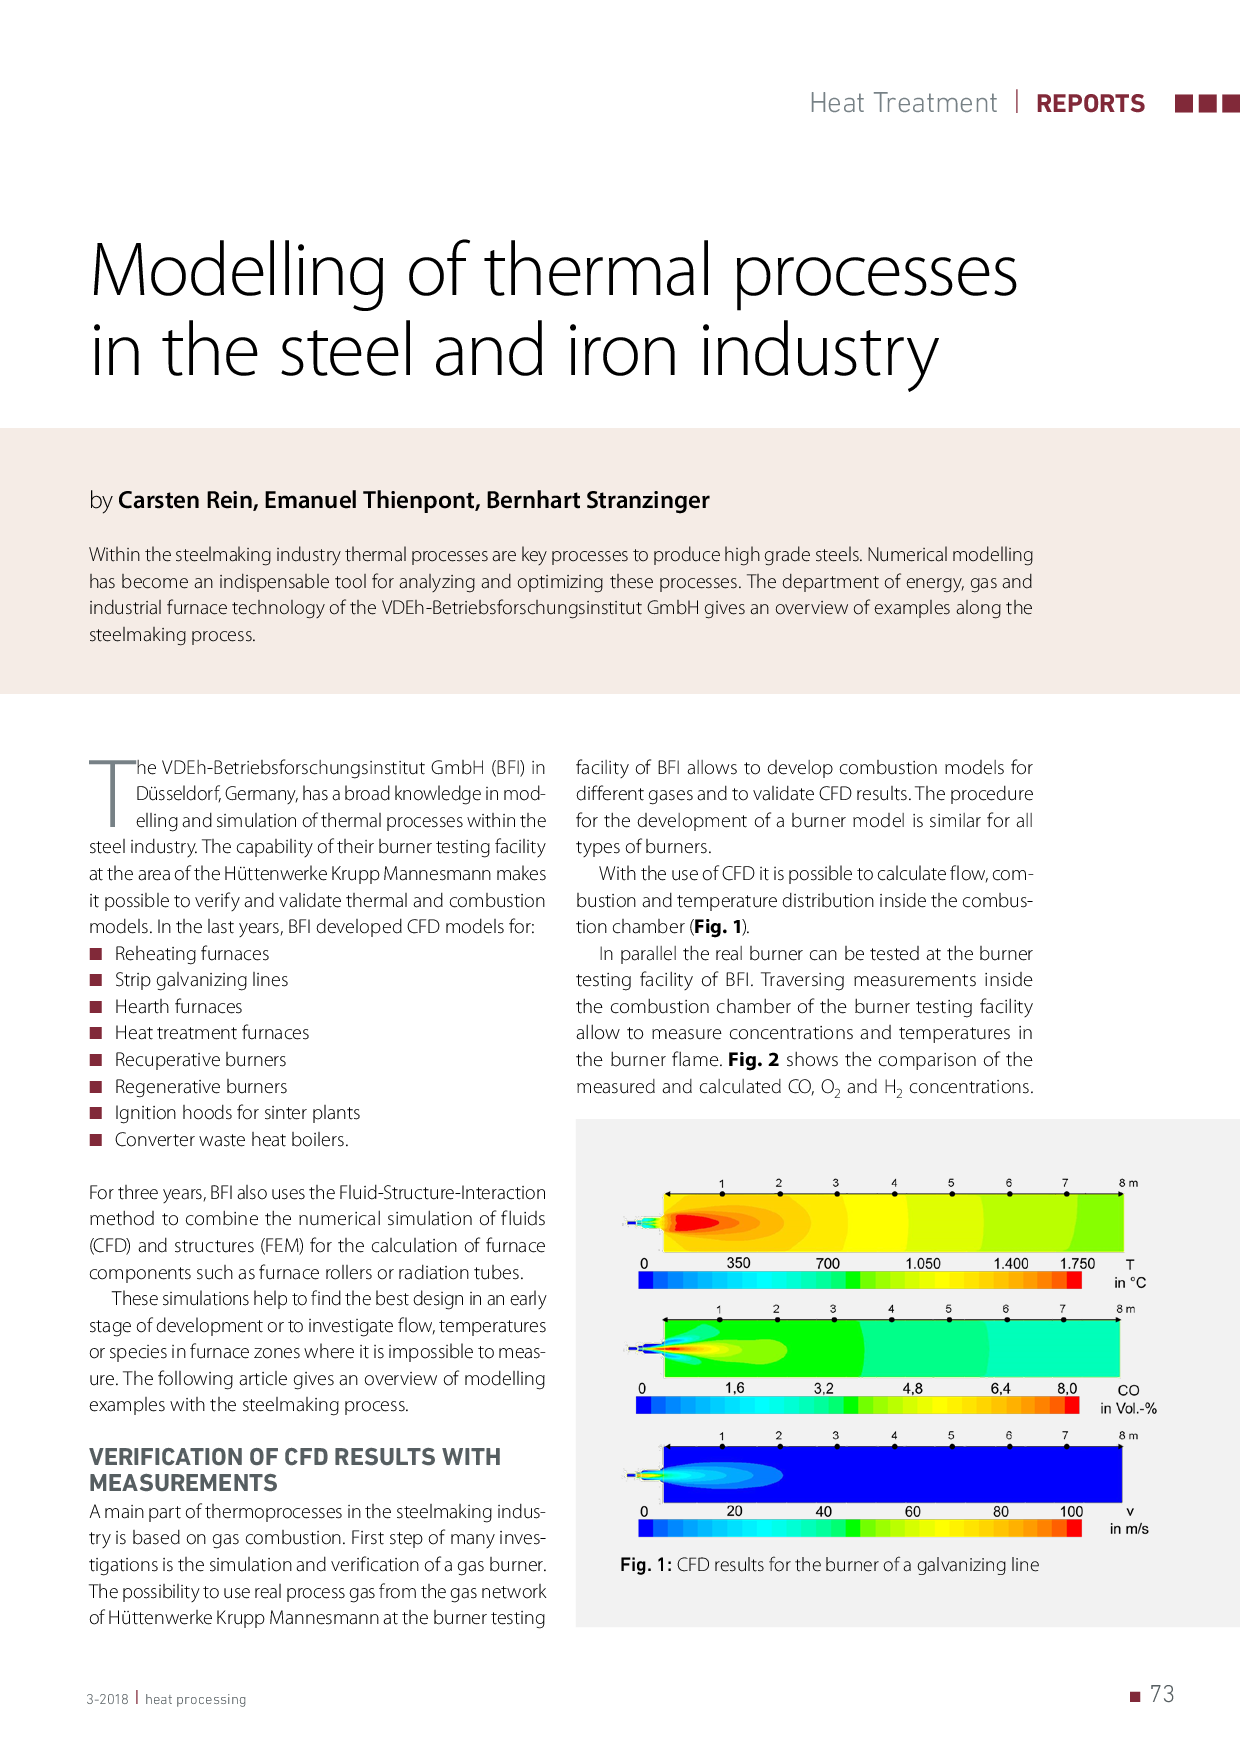 Modelling of thermal processes in the steel and iron industry